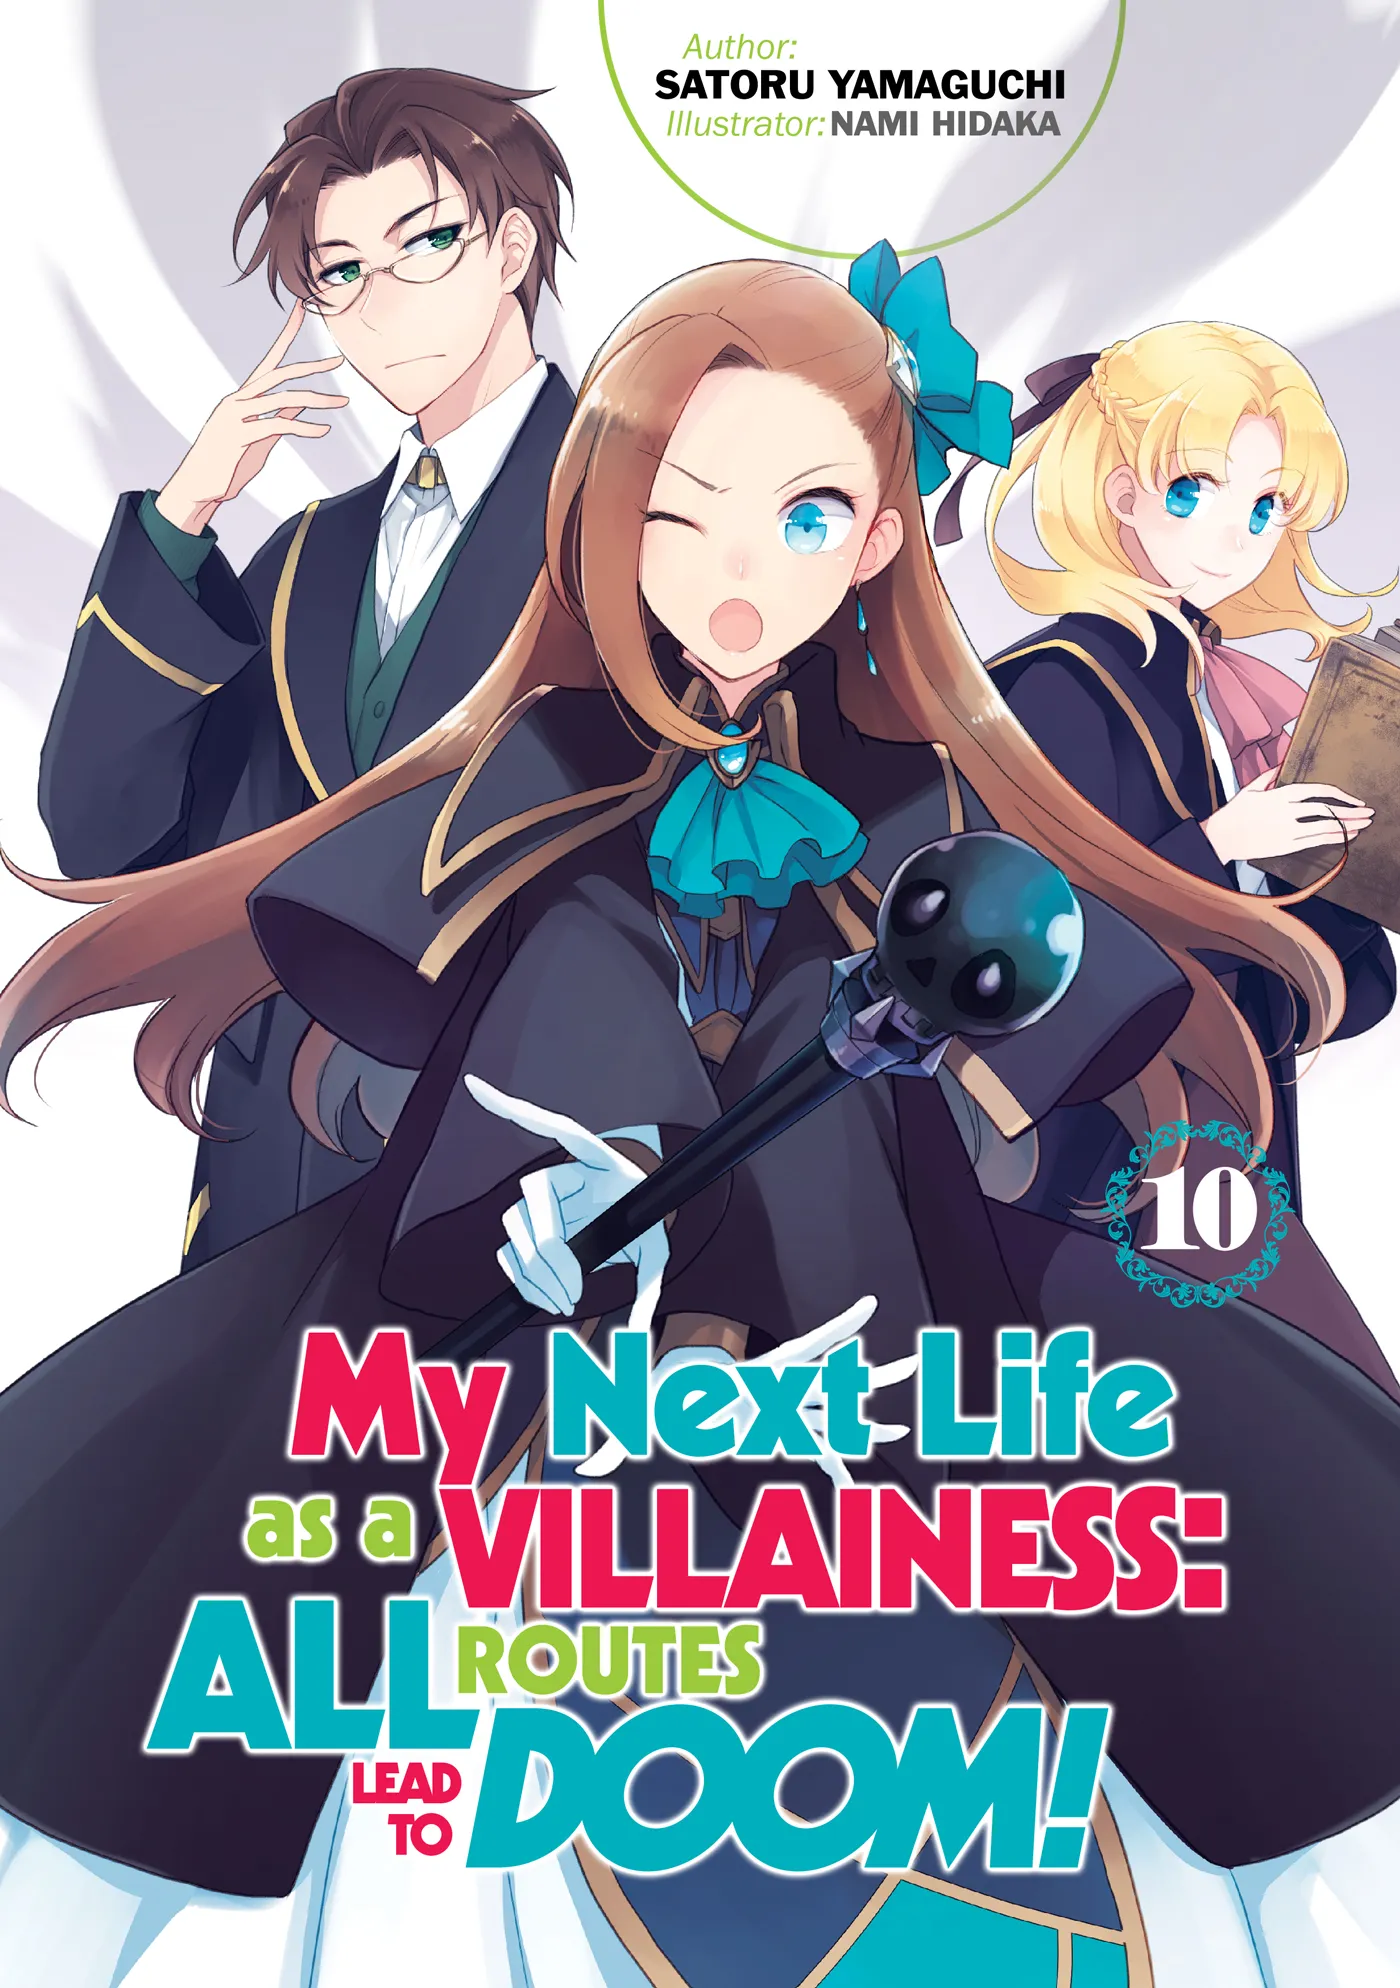 My Next Life as a Villainess: All Routes Lead to Doom! Volume 10 (My Next Life as a Villainess: All Routes Lead to Doom! #10)